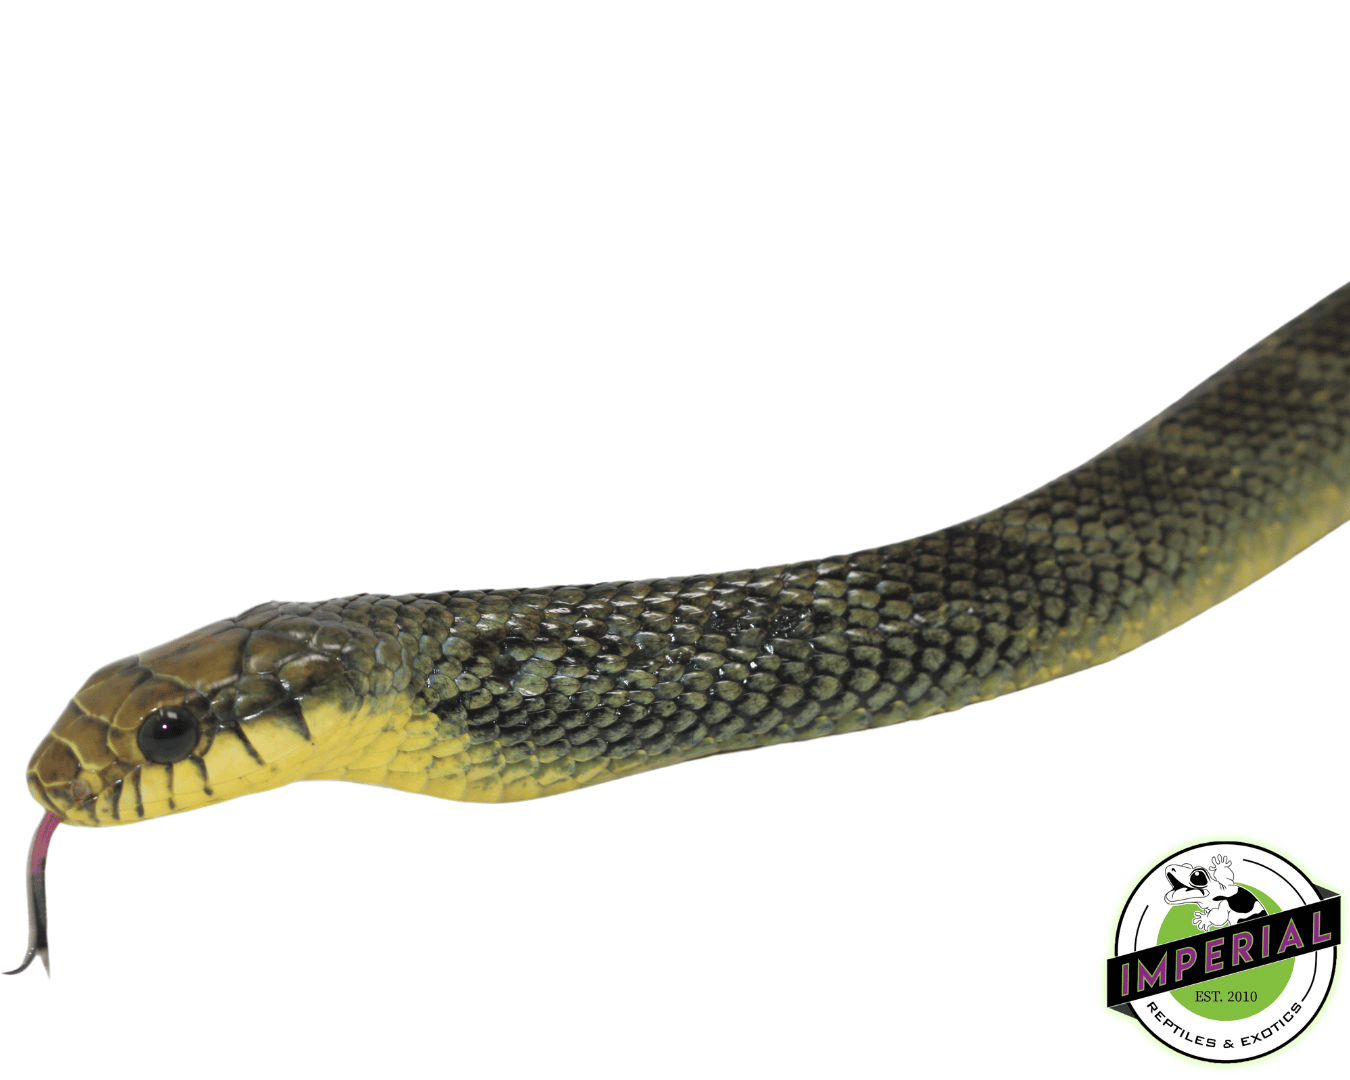 yellow puffing snake for sale, buy reptiles online at cheap prices